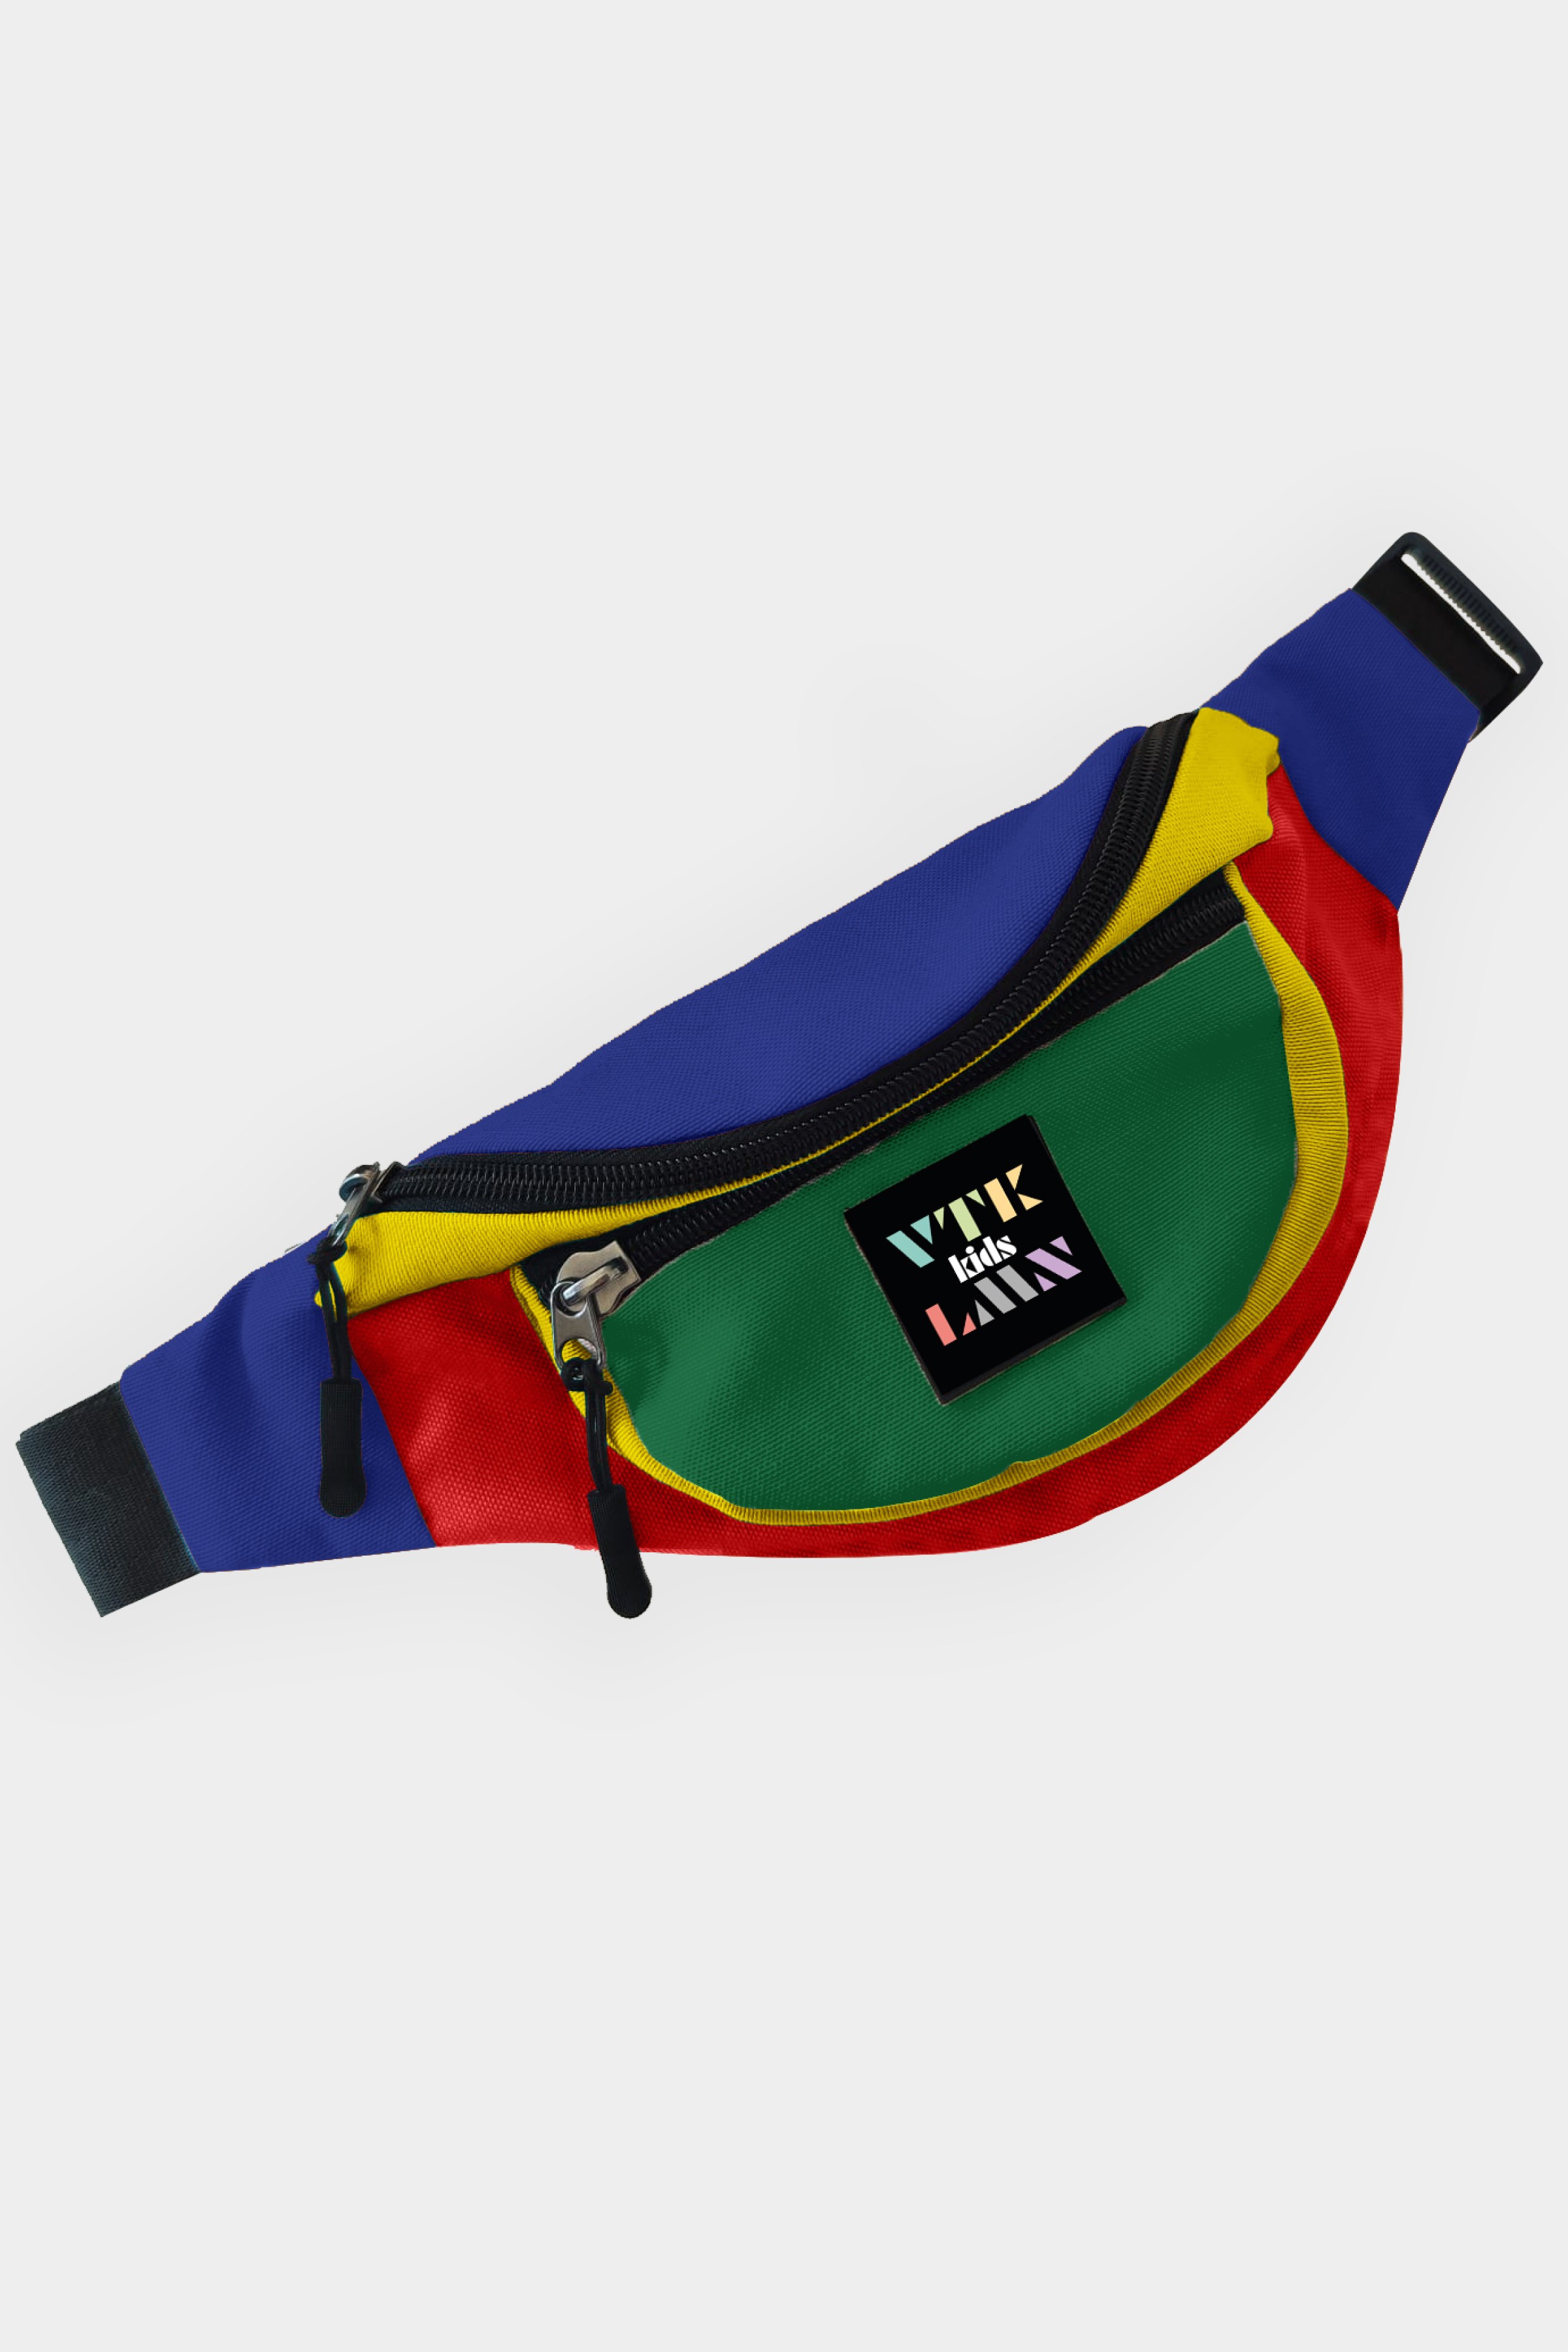 Colorful Shoulder and Waist Kid Bag - Green Yellow Red Blue